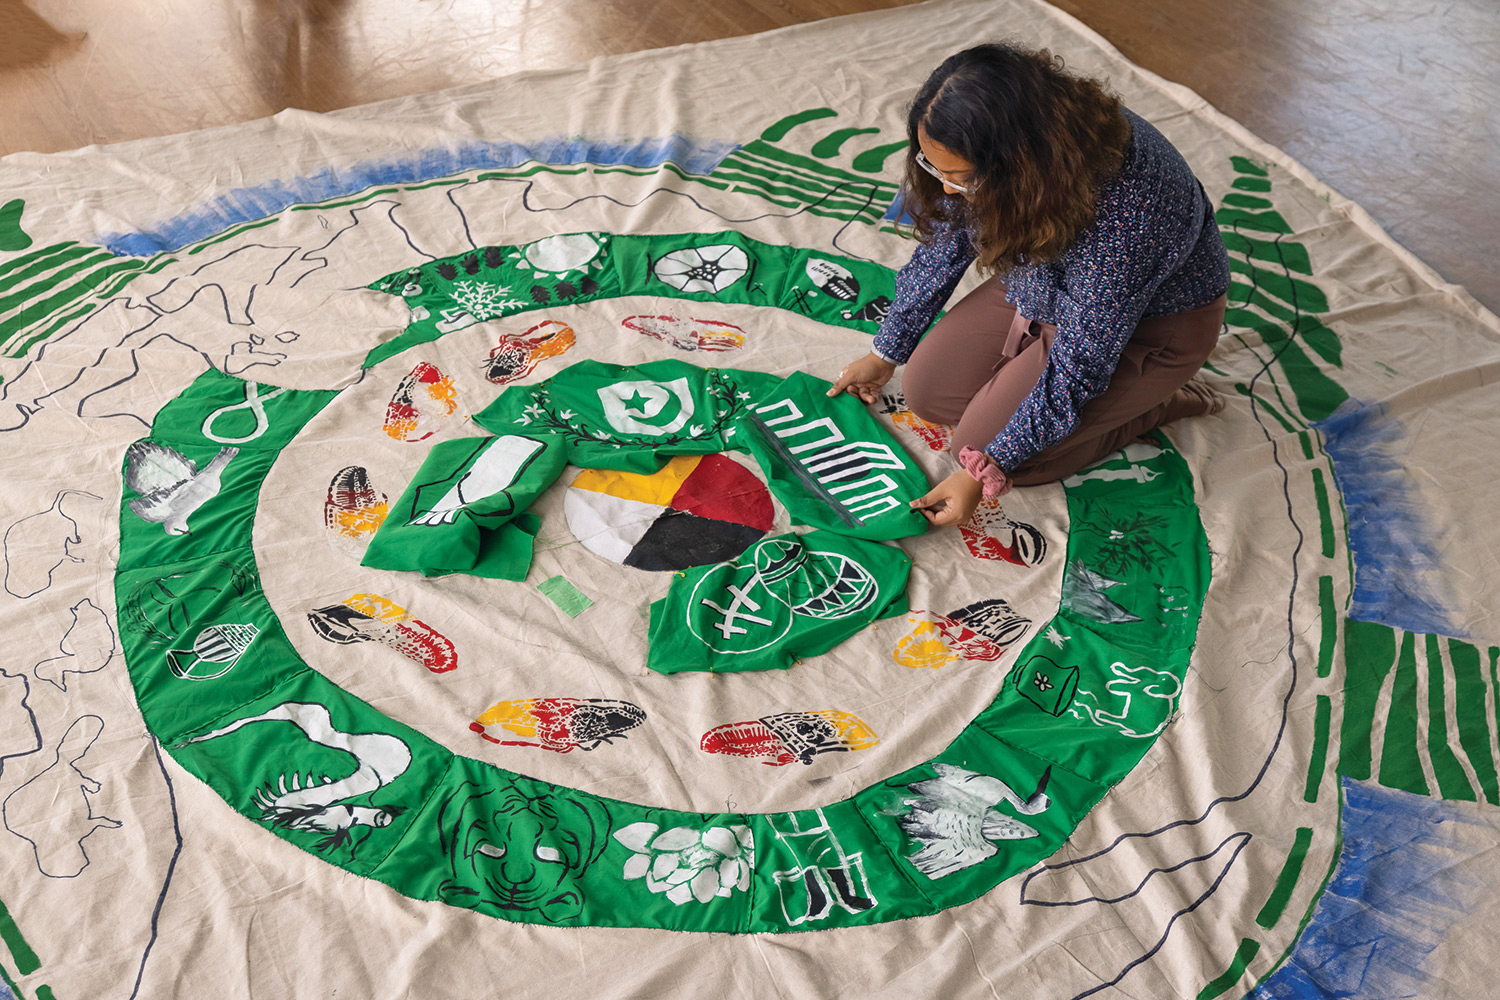 A cloth mural, depicting symbols sewn around a green outer ring as well as green inner ring, on top of the back of a turtle, with a medicine wheel in the centre, is spread out on the ground. Mandy Nelson is applying finishing touches on the inner ring of the mural.